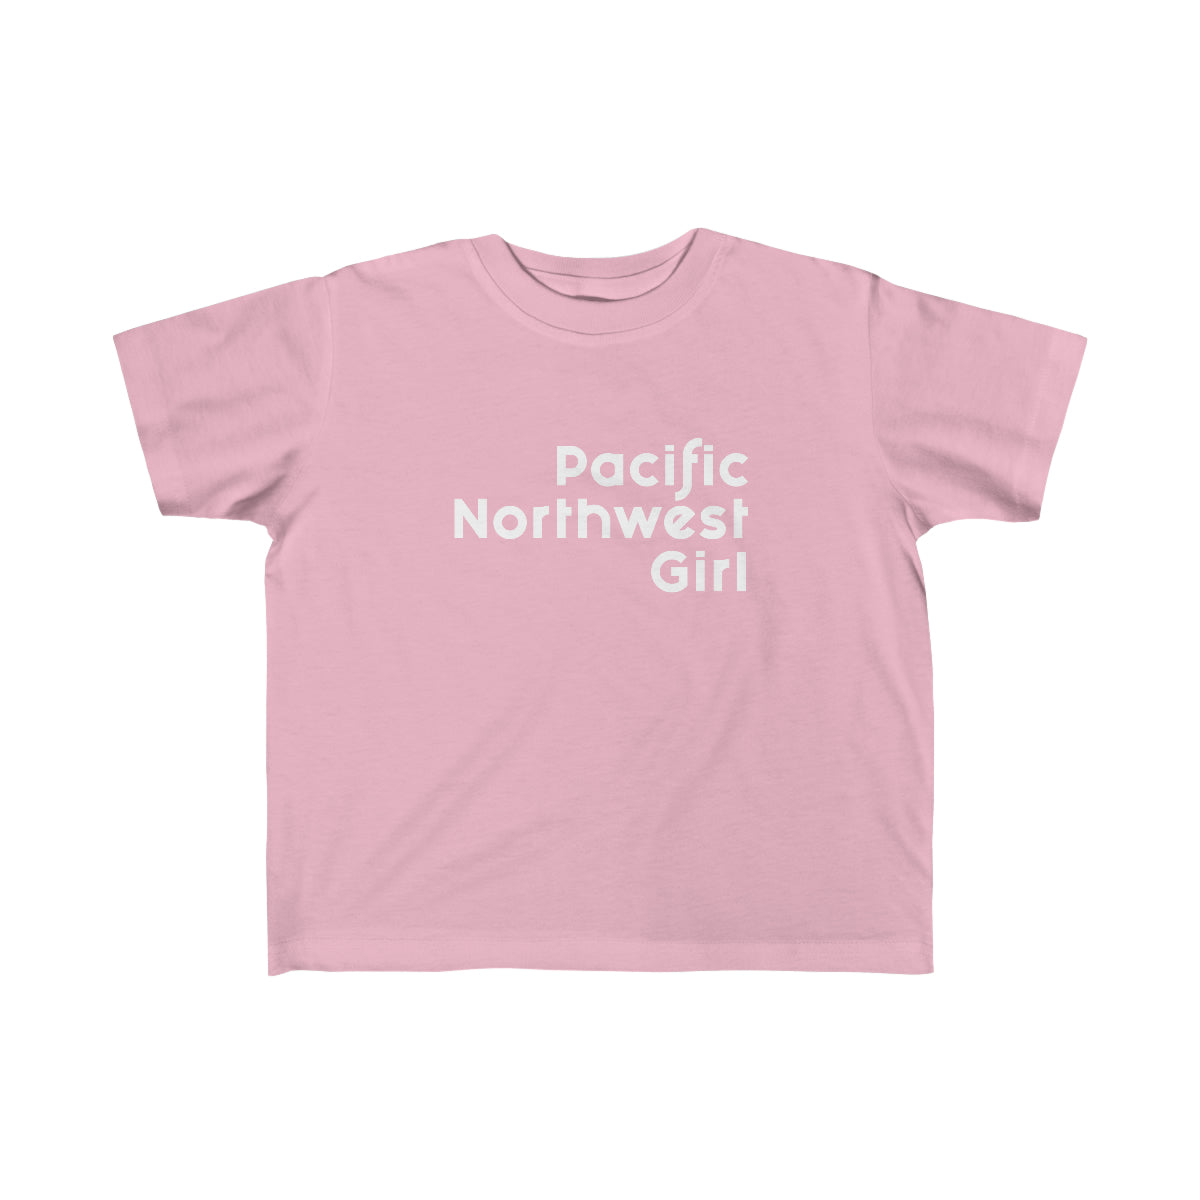 Pacific Northwest Girl Toddler Tee Pink / 2T - The Northwest Store